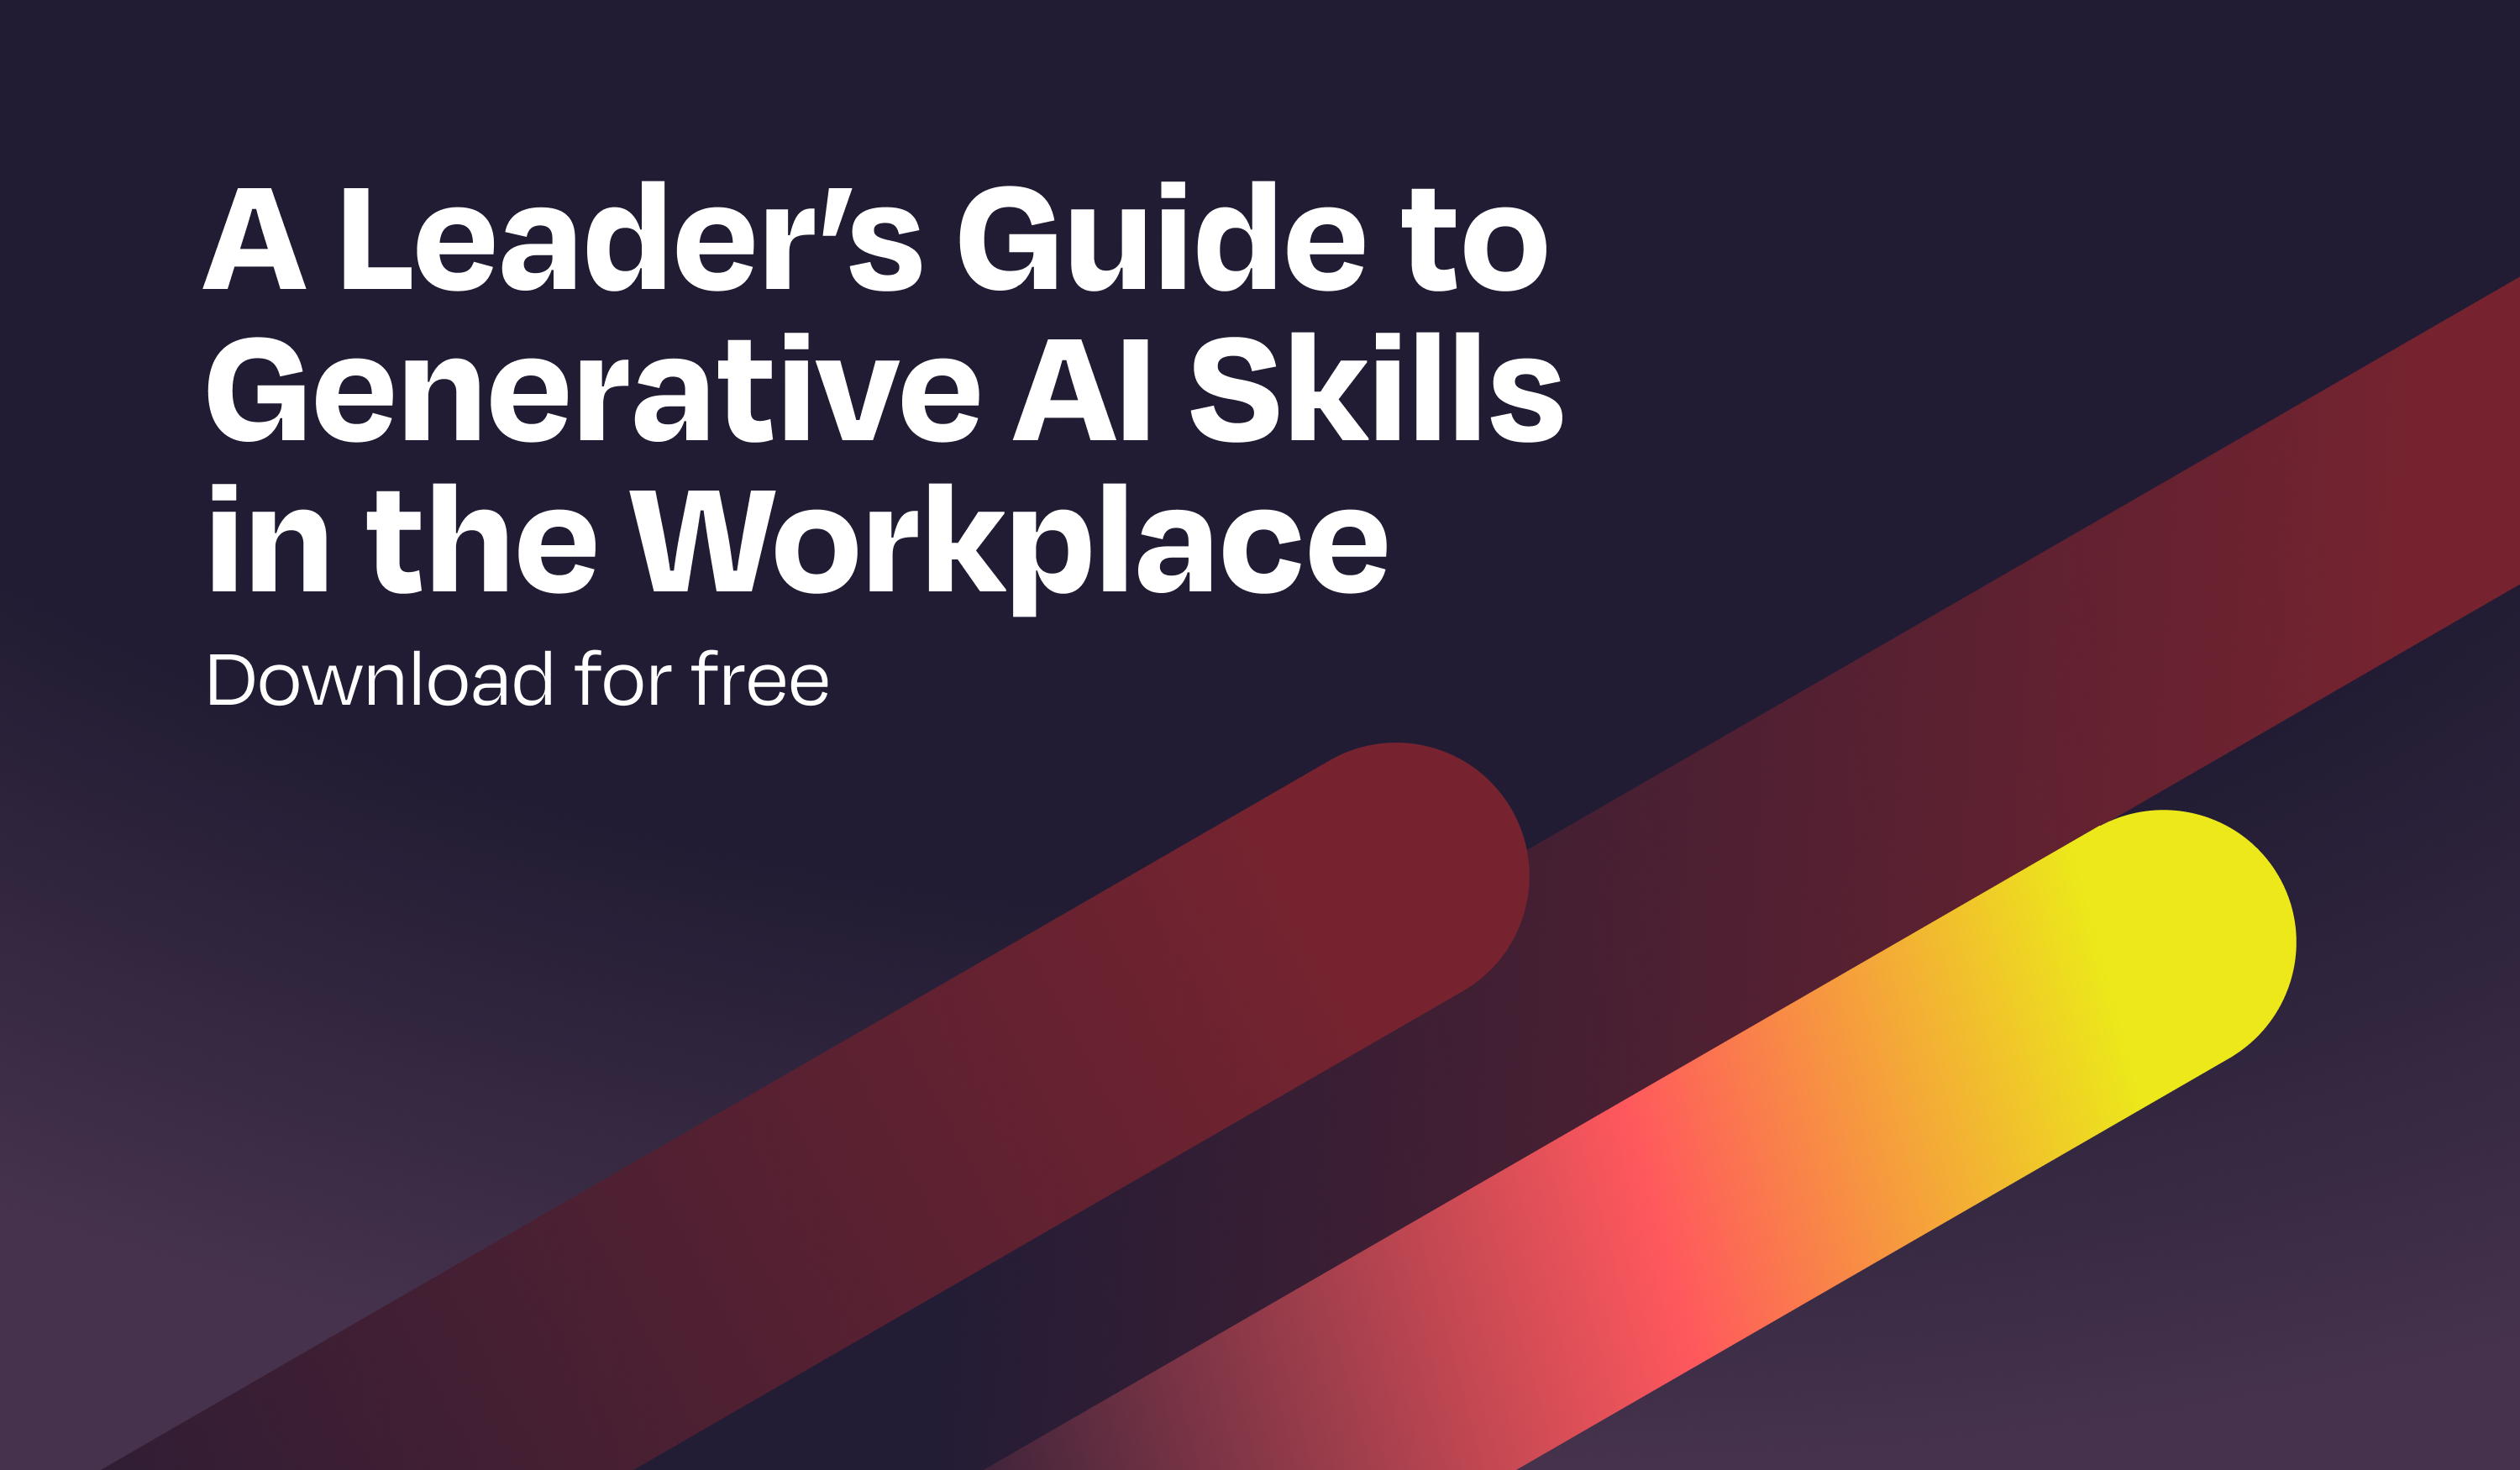 A Leader's Guide to Generative AI Skills in the Workplace